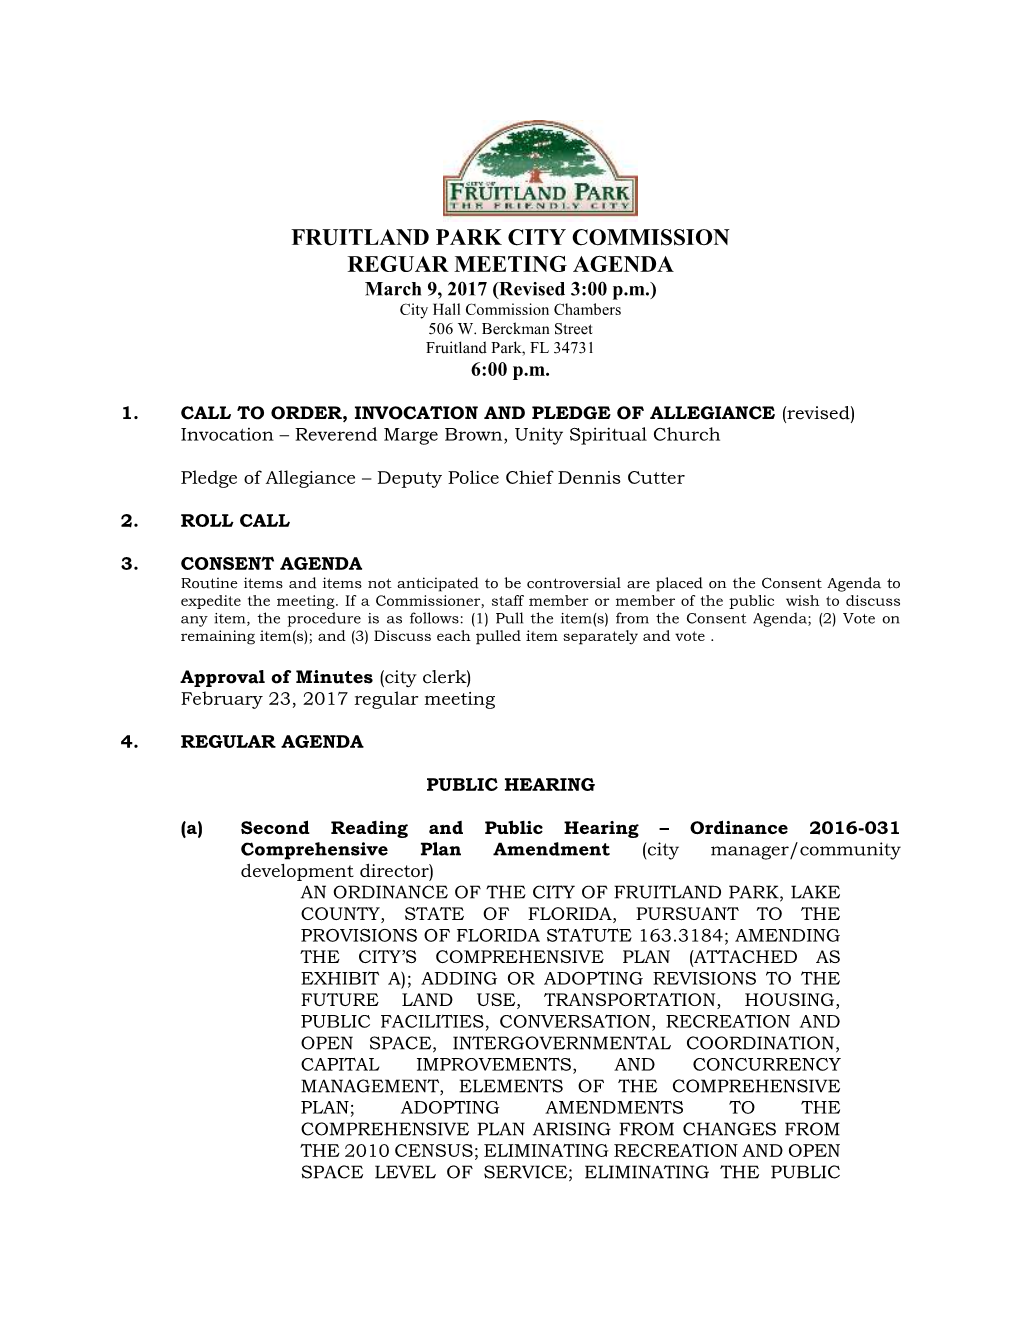 FRUITLAND PARK CITY COMMISSION REGUAR MEETING AGENDA March 9, 2017 (Revised 3:00 P.M.) City Hall Commission Chambers 506 W